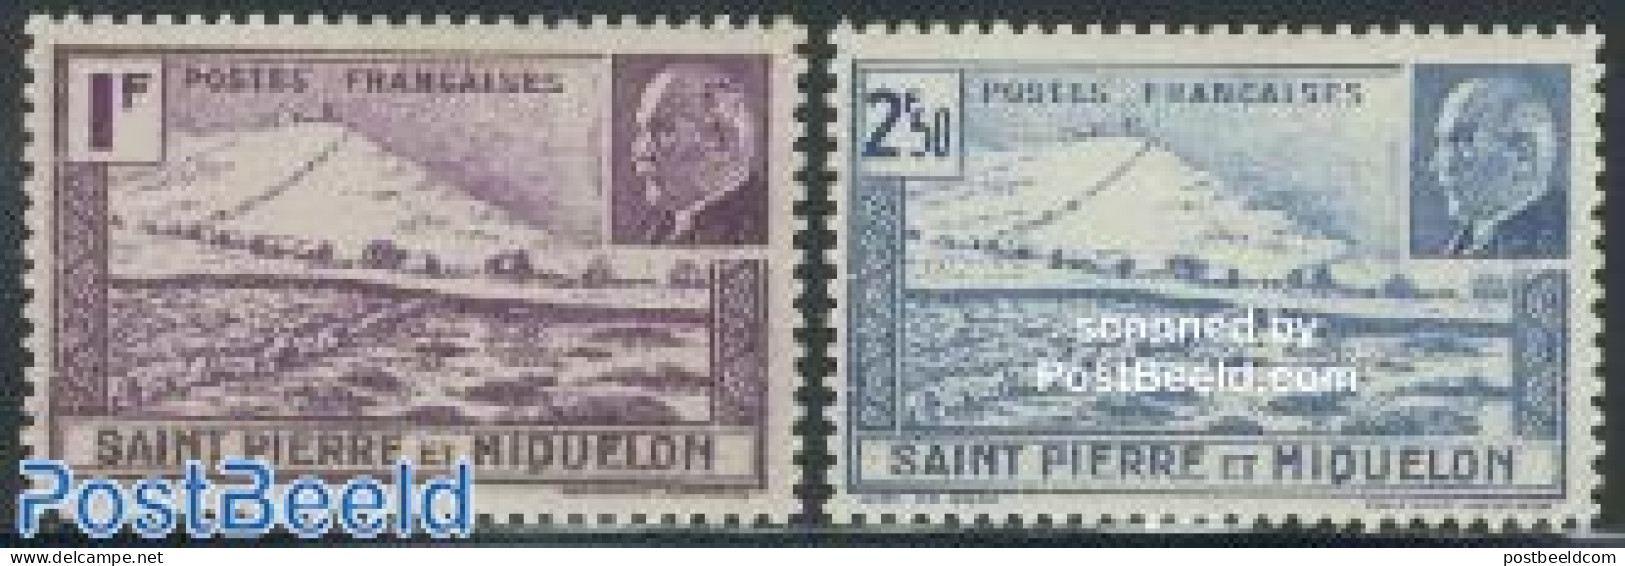 Saint Pierre And Miquelon 1941 Petain 2v, Mint NH, Various - Lighthouses & Safety At Sea - Lighthouses